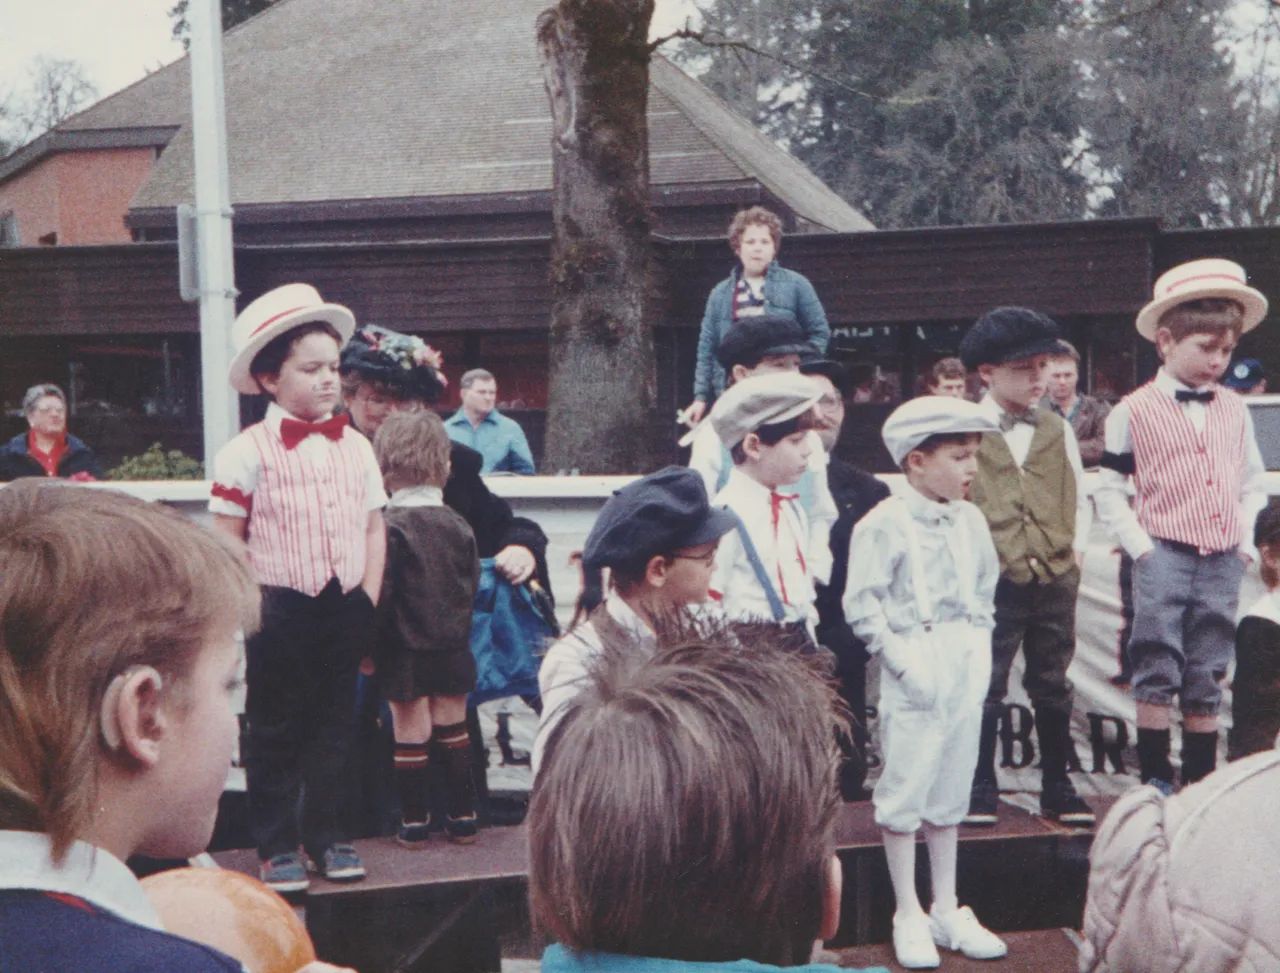 1985 - Crystal or Katie or somebody else, a festival event, blue ribbon, awards ceremony, boys, others, not sure what year or who or where-4.png